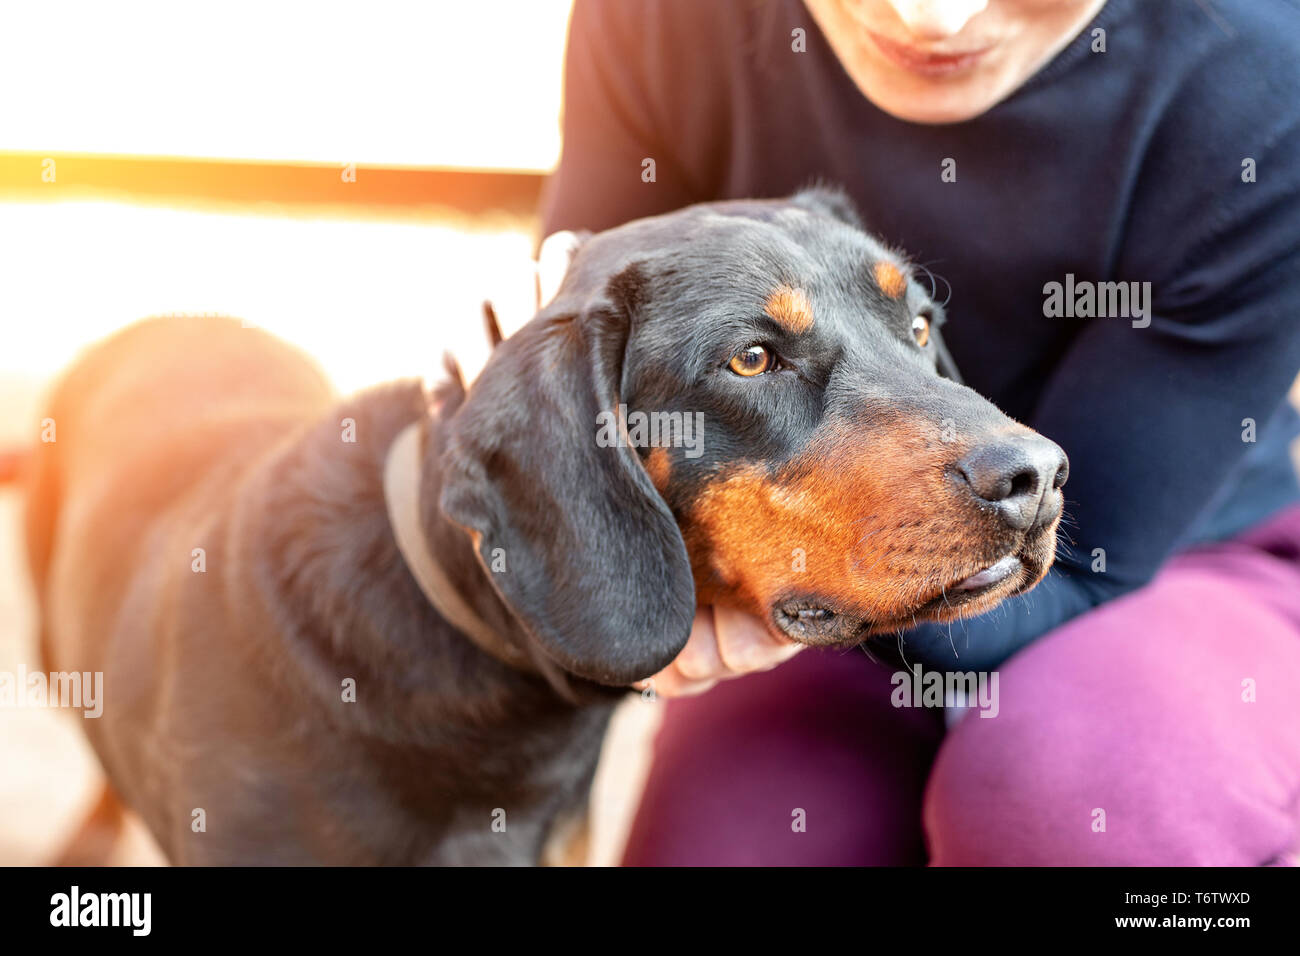 Femalel owner hugging with young german hunting terrier dog outdoors on bright sunny day. Purebred adorable Jagdterrier puppy. Stock Photo